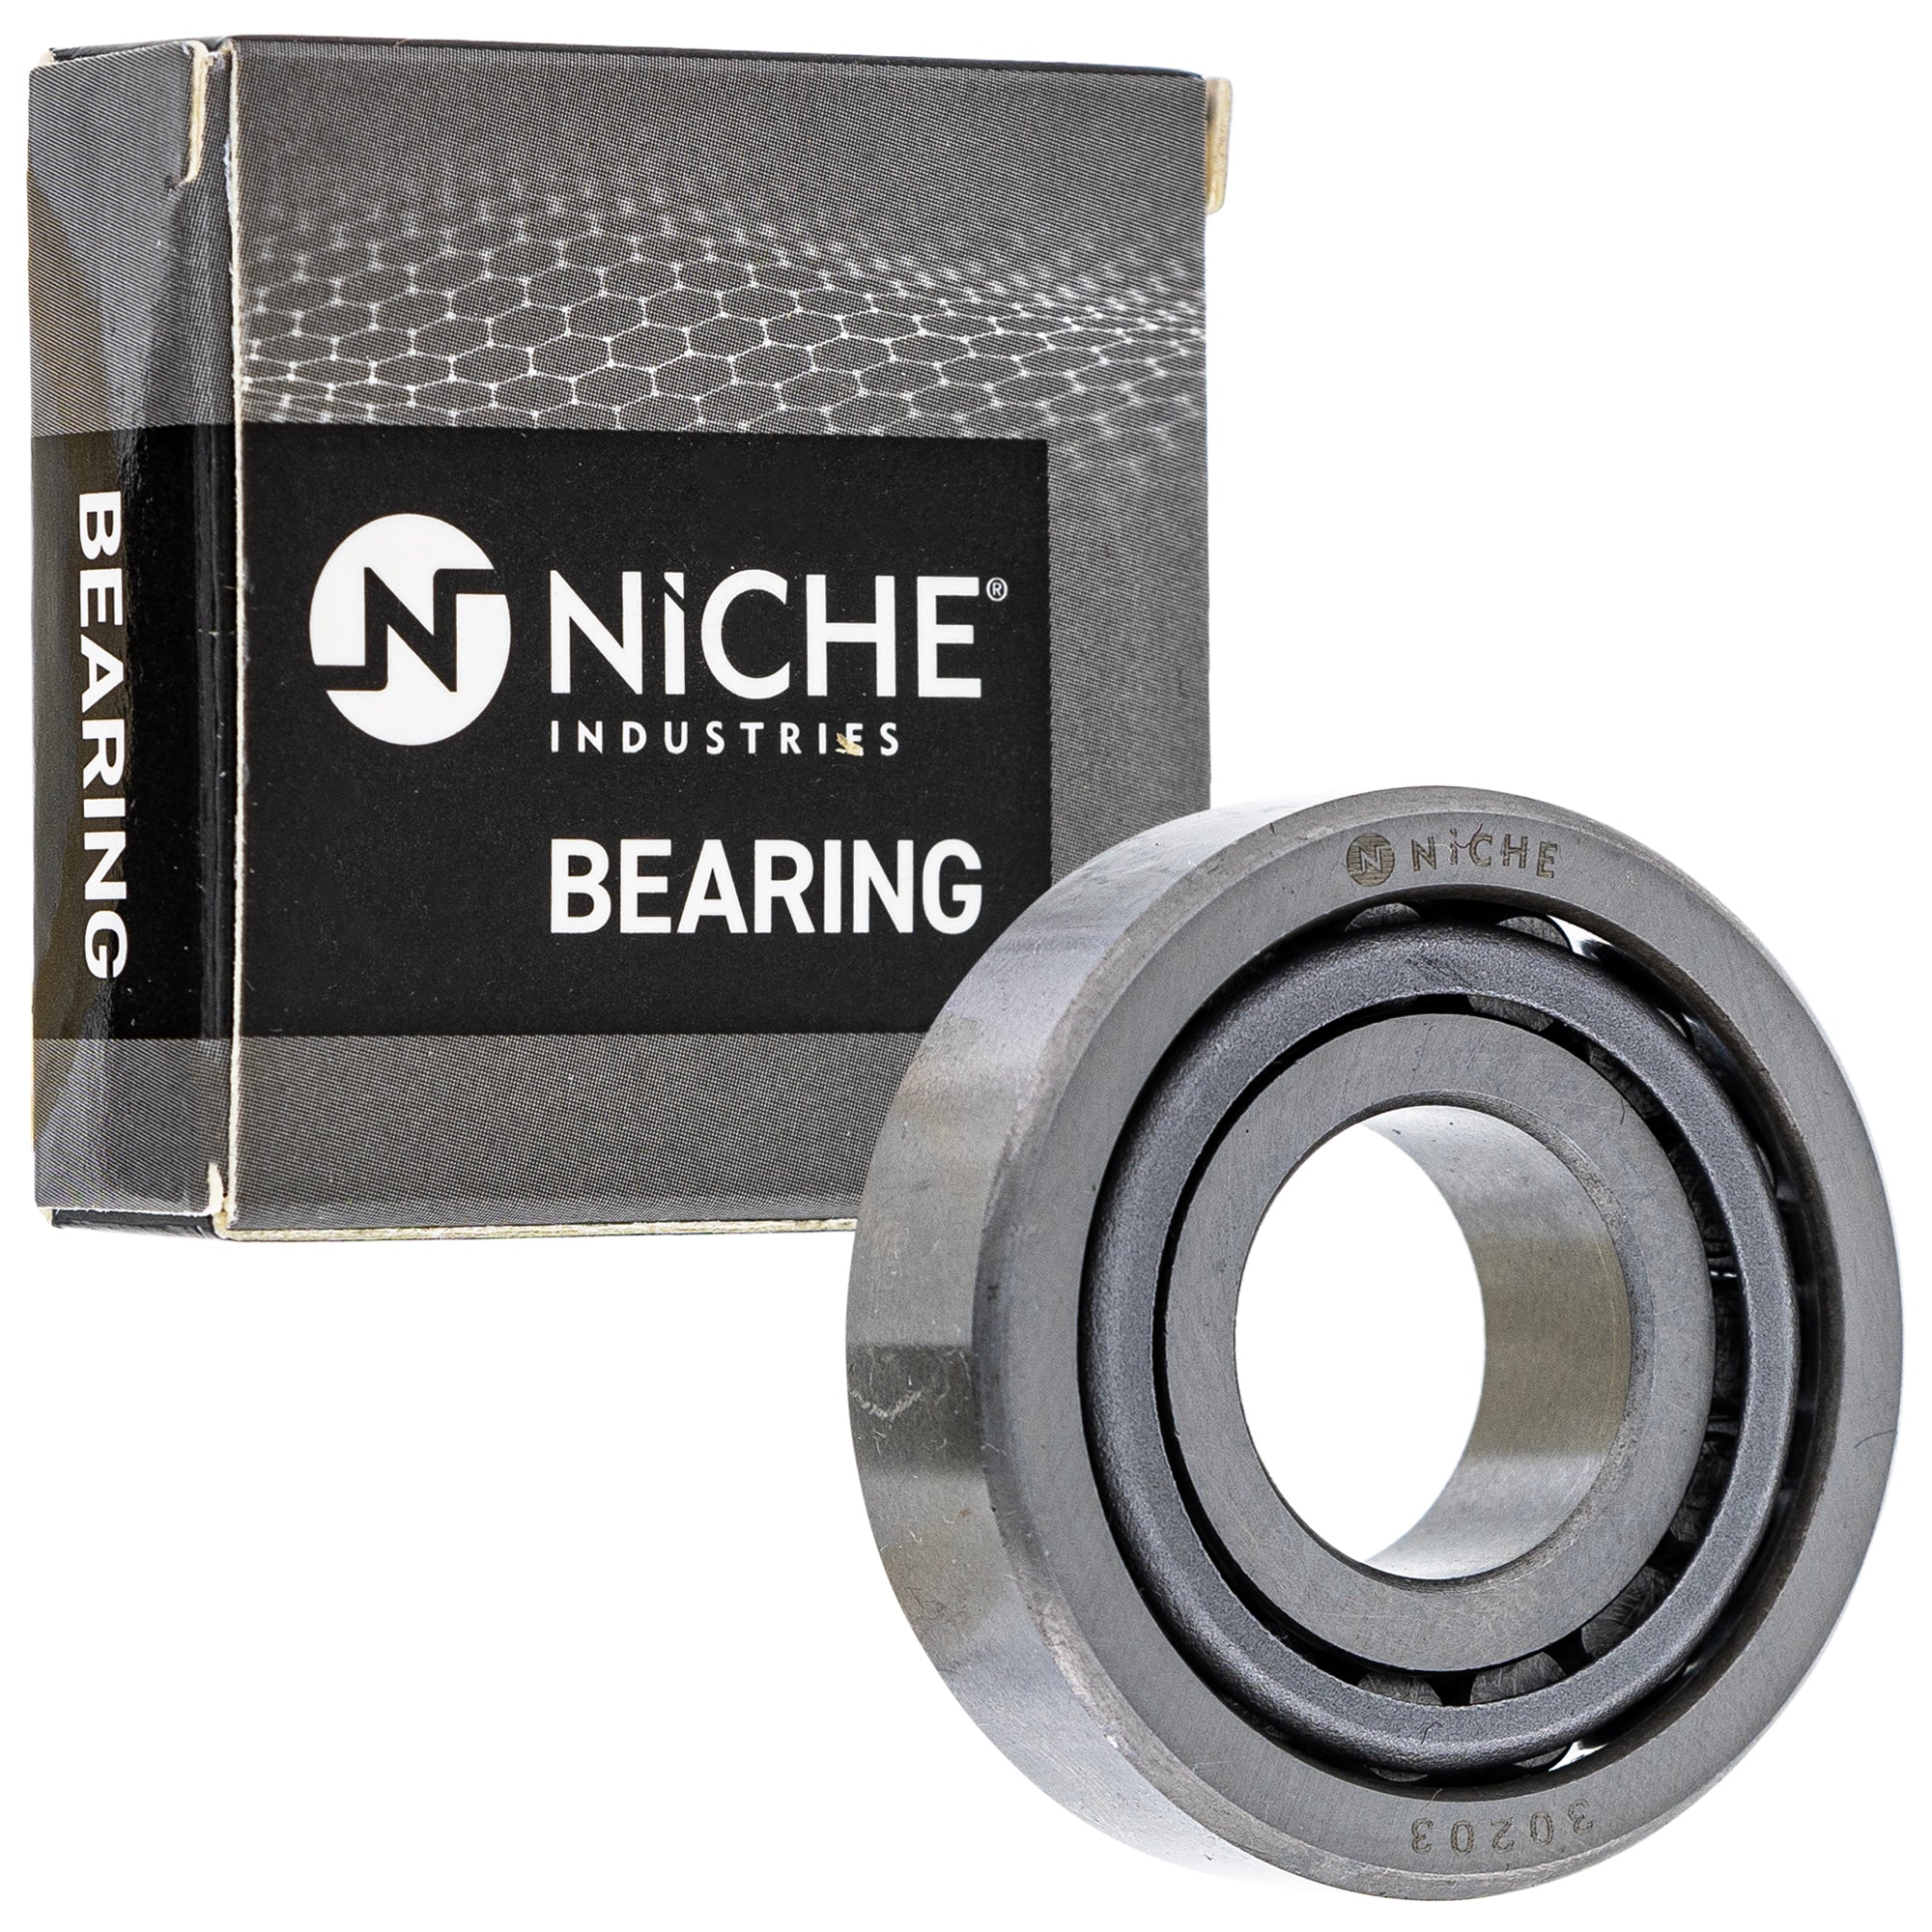 NICHE 519-CBB2323R Bearing 10-Pack for zOTHER R90S R90 R80ST R80RT